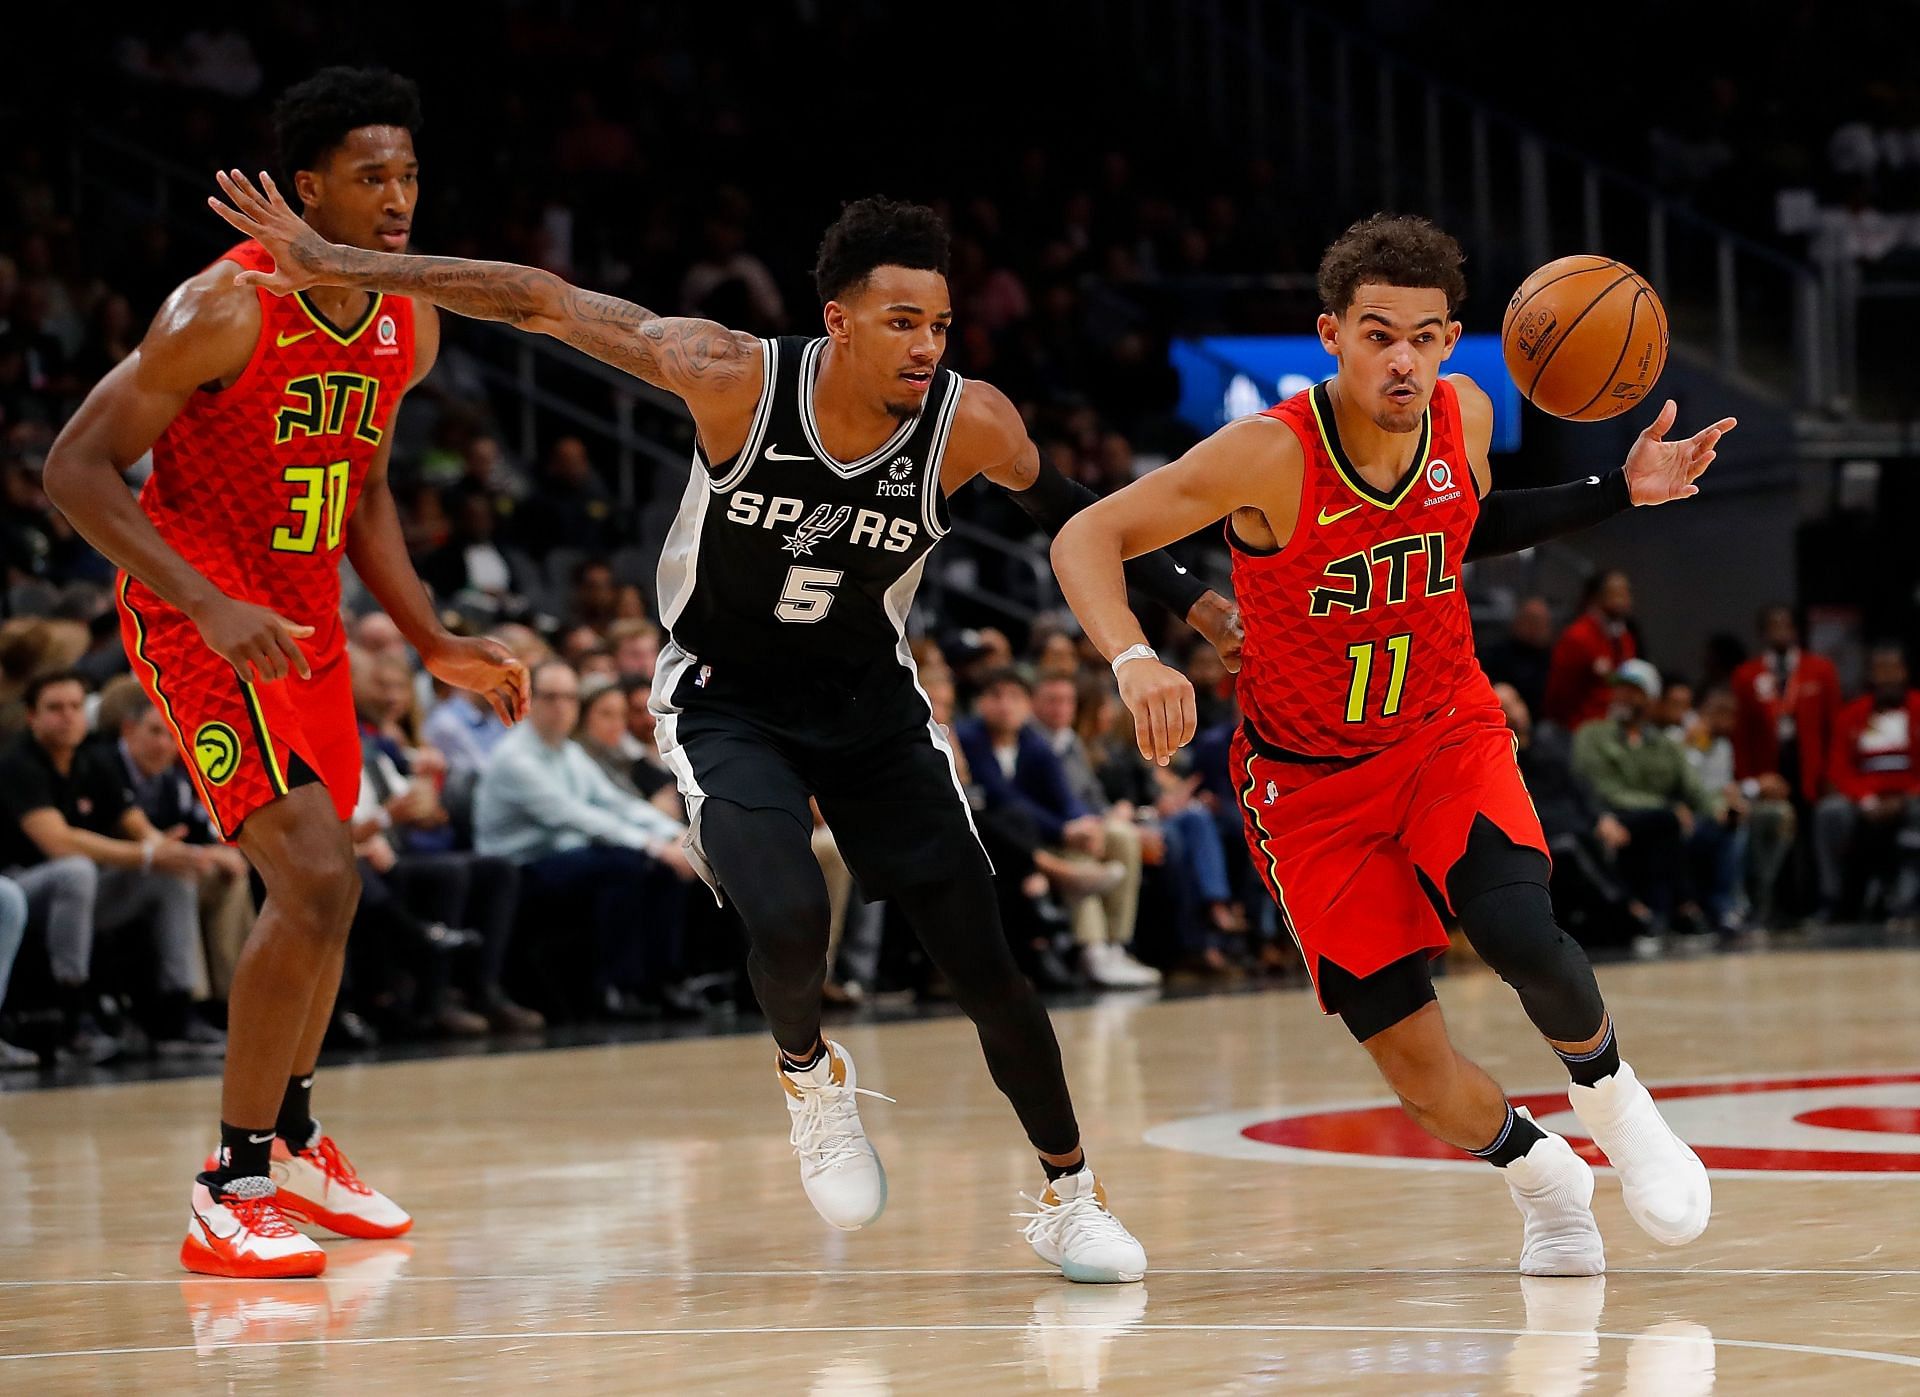 Trae Young of the Atlanta Hawks loses the ball as he drives against Dejounte Murray of the San Antonio Spurs on Nov. 5, 2019, in Atlanta, Georgia.